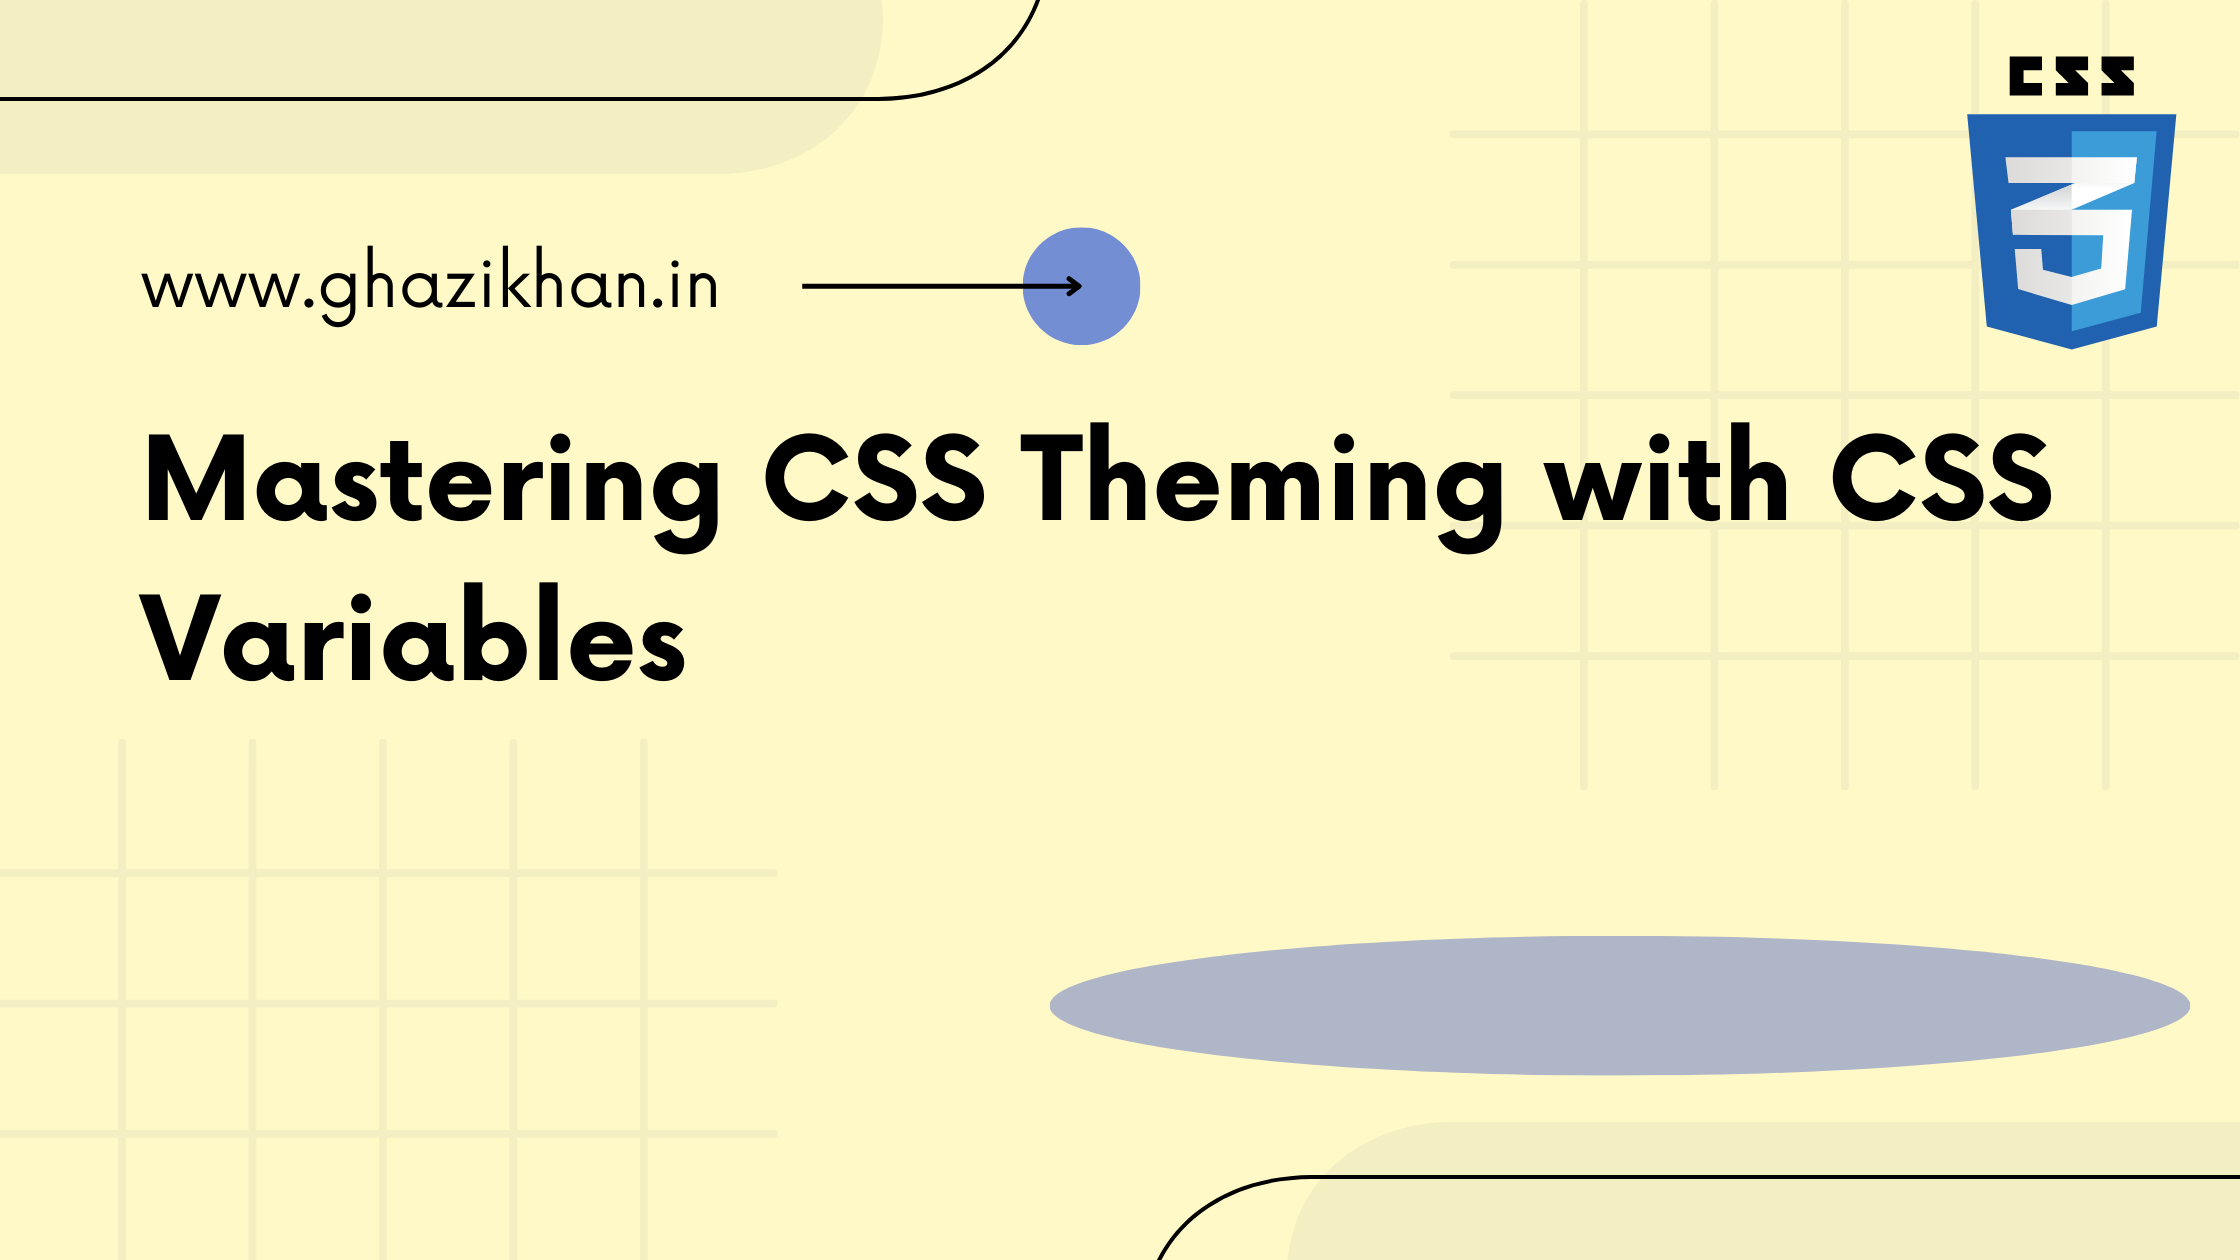 Mastering CSS Theming with CSS Variables